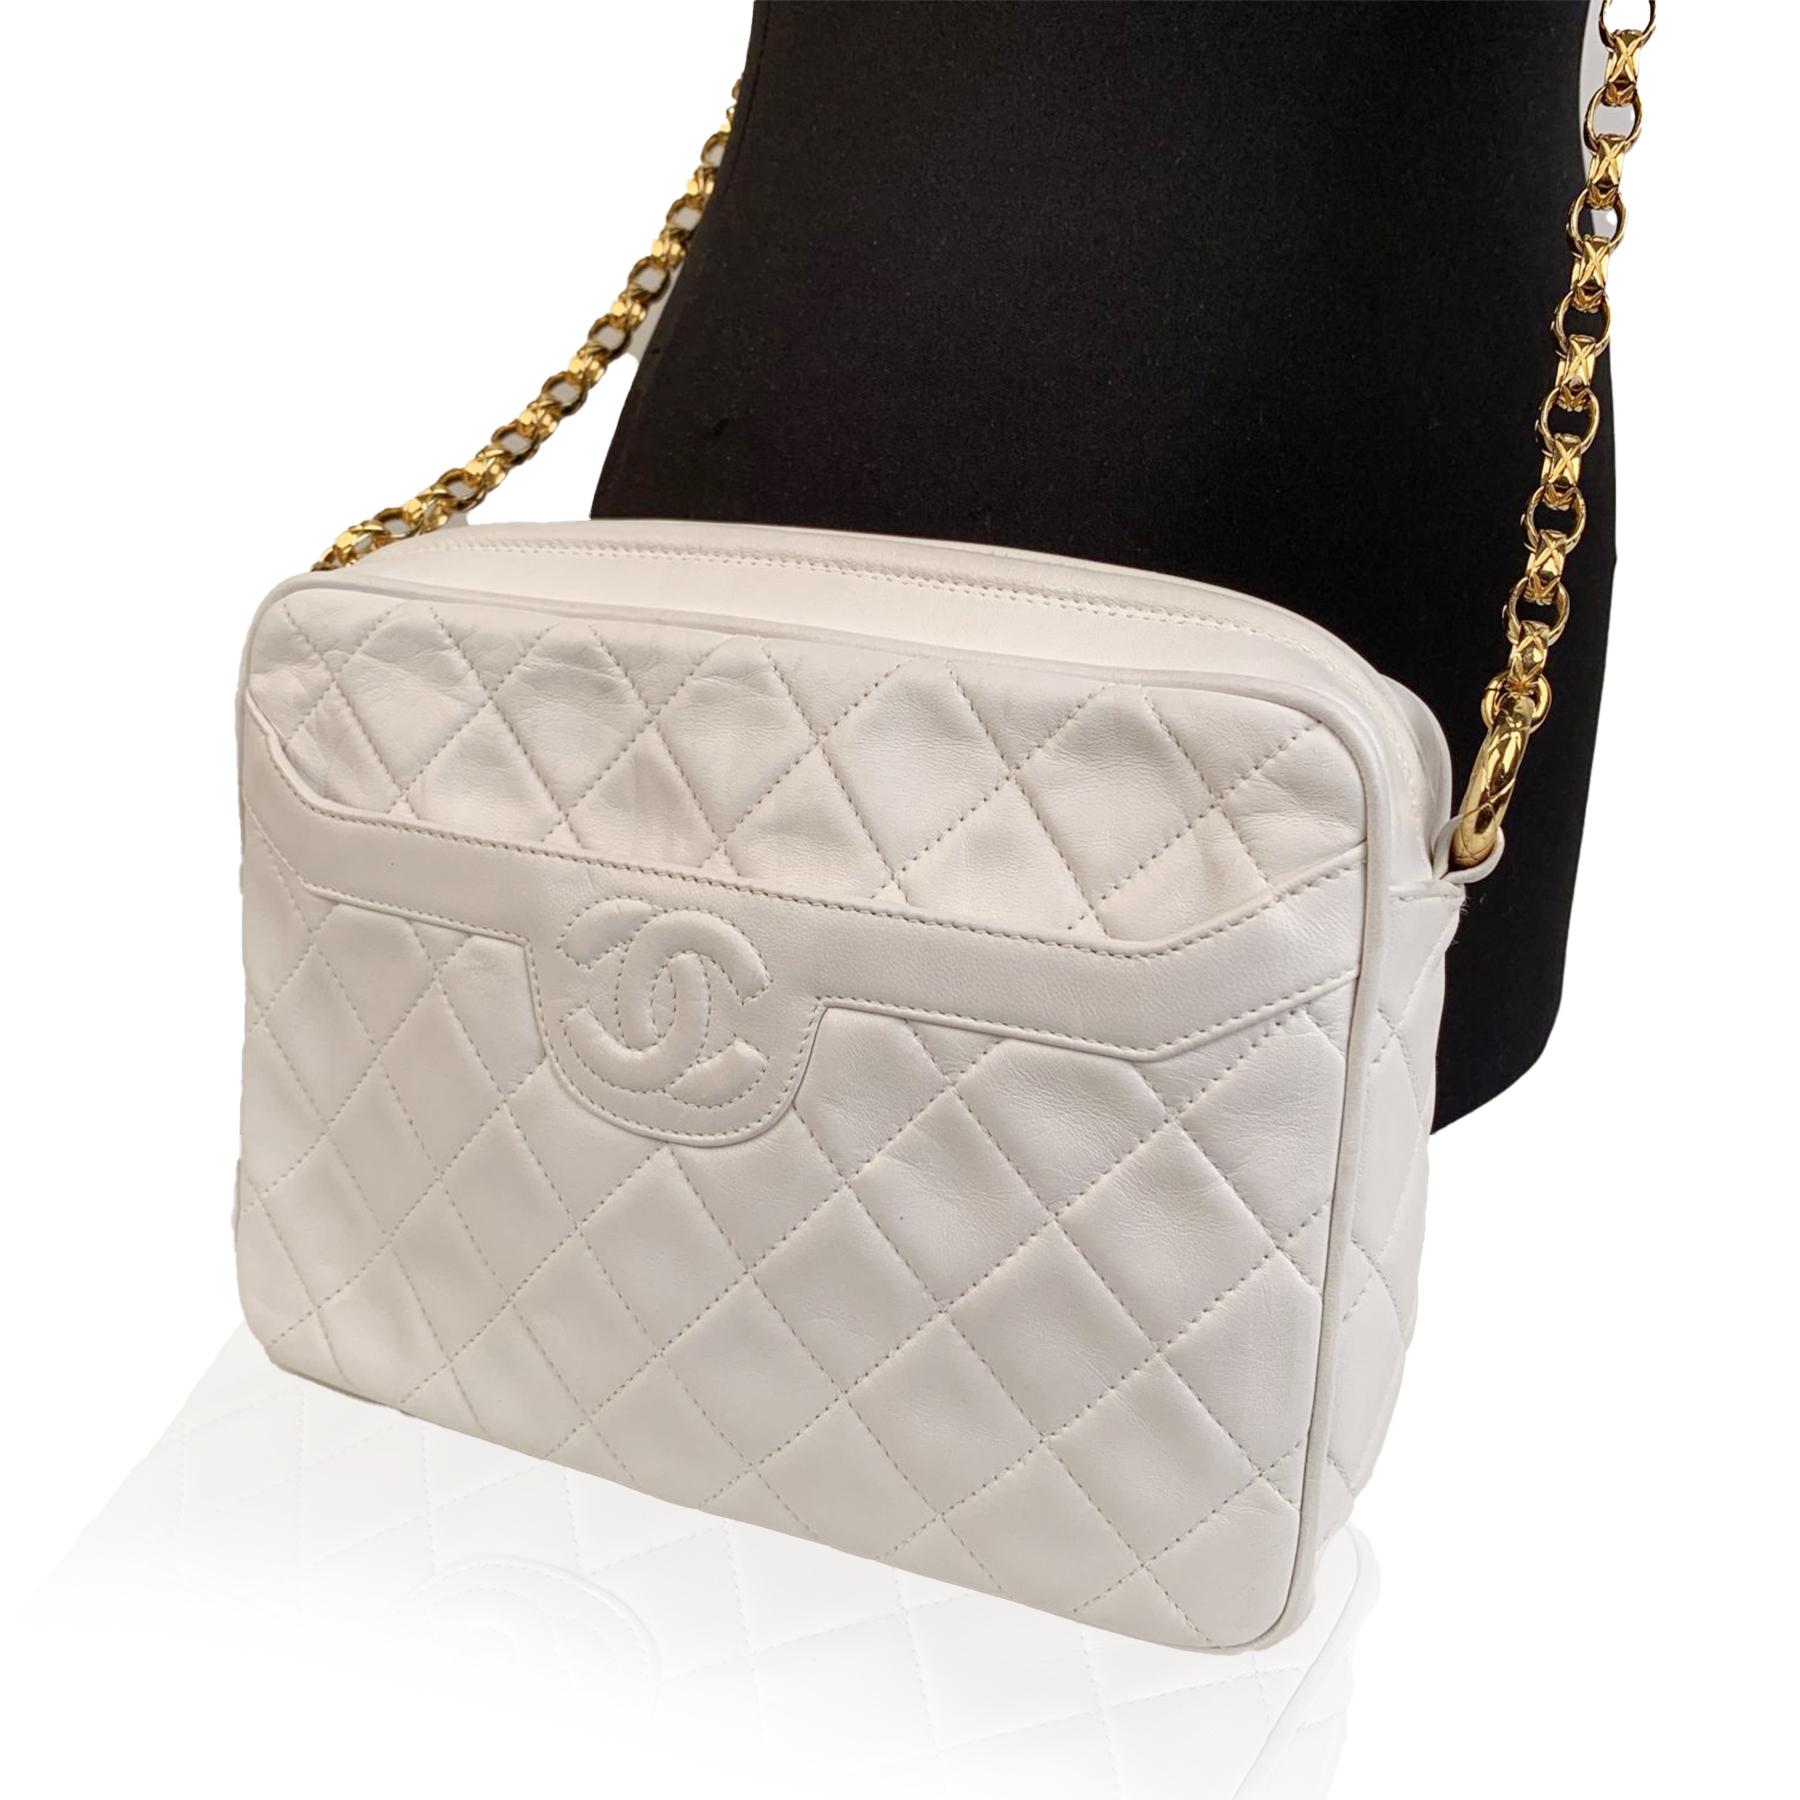 Gray Chanel Vintage White Quilted Leather CC Stitch Camera Bag